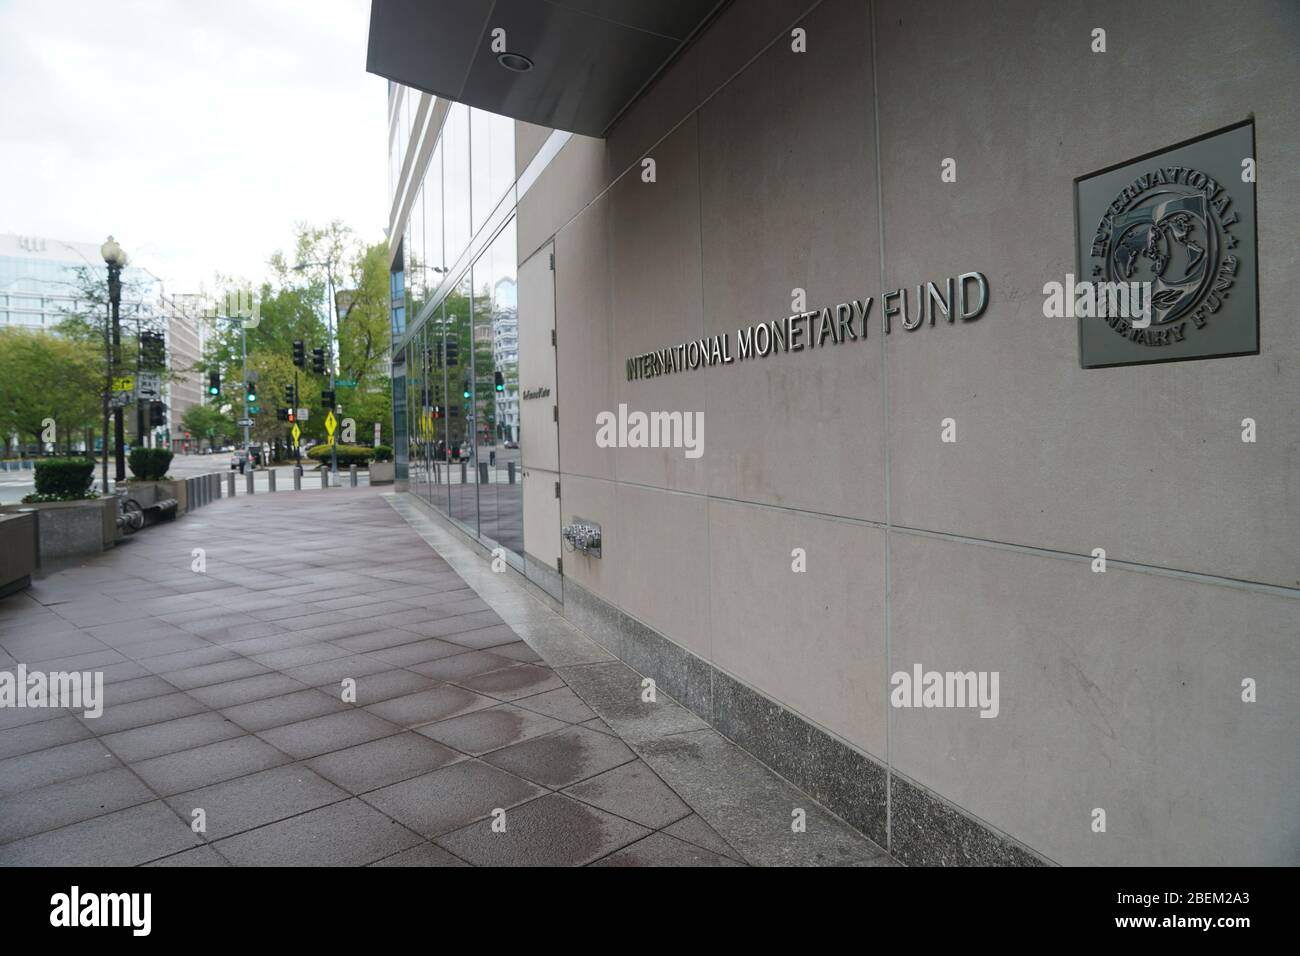 Washington, DC, USA. 13th Apr, 2020. The International Monetary Fund (IMF) Headquarters is seen in Washington, DC, the United States, April 13, 2020. The global economy is on track to contract 'sharply' by 3 percent in 2020 as a result of the COVID-19 pandemic, much worse than during the 2008-09 financial crisis, according to the International Monetary Fund (IMF)'s World Economic Outlook released Tuesday. Credit: Liu Jie/Xinhua/Alamy Live News Stock Photo